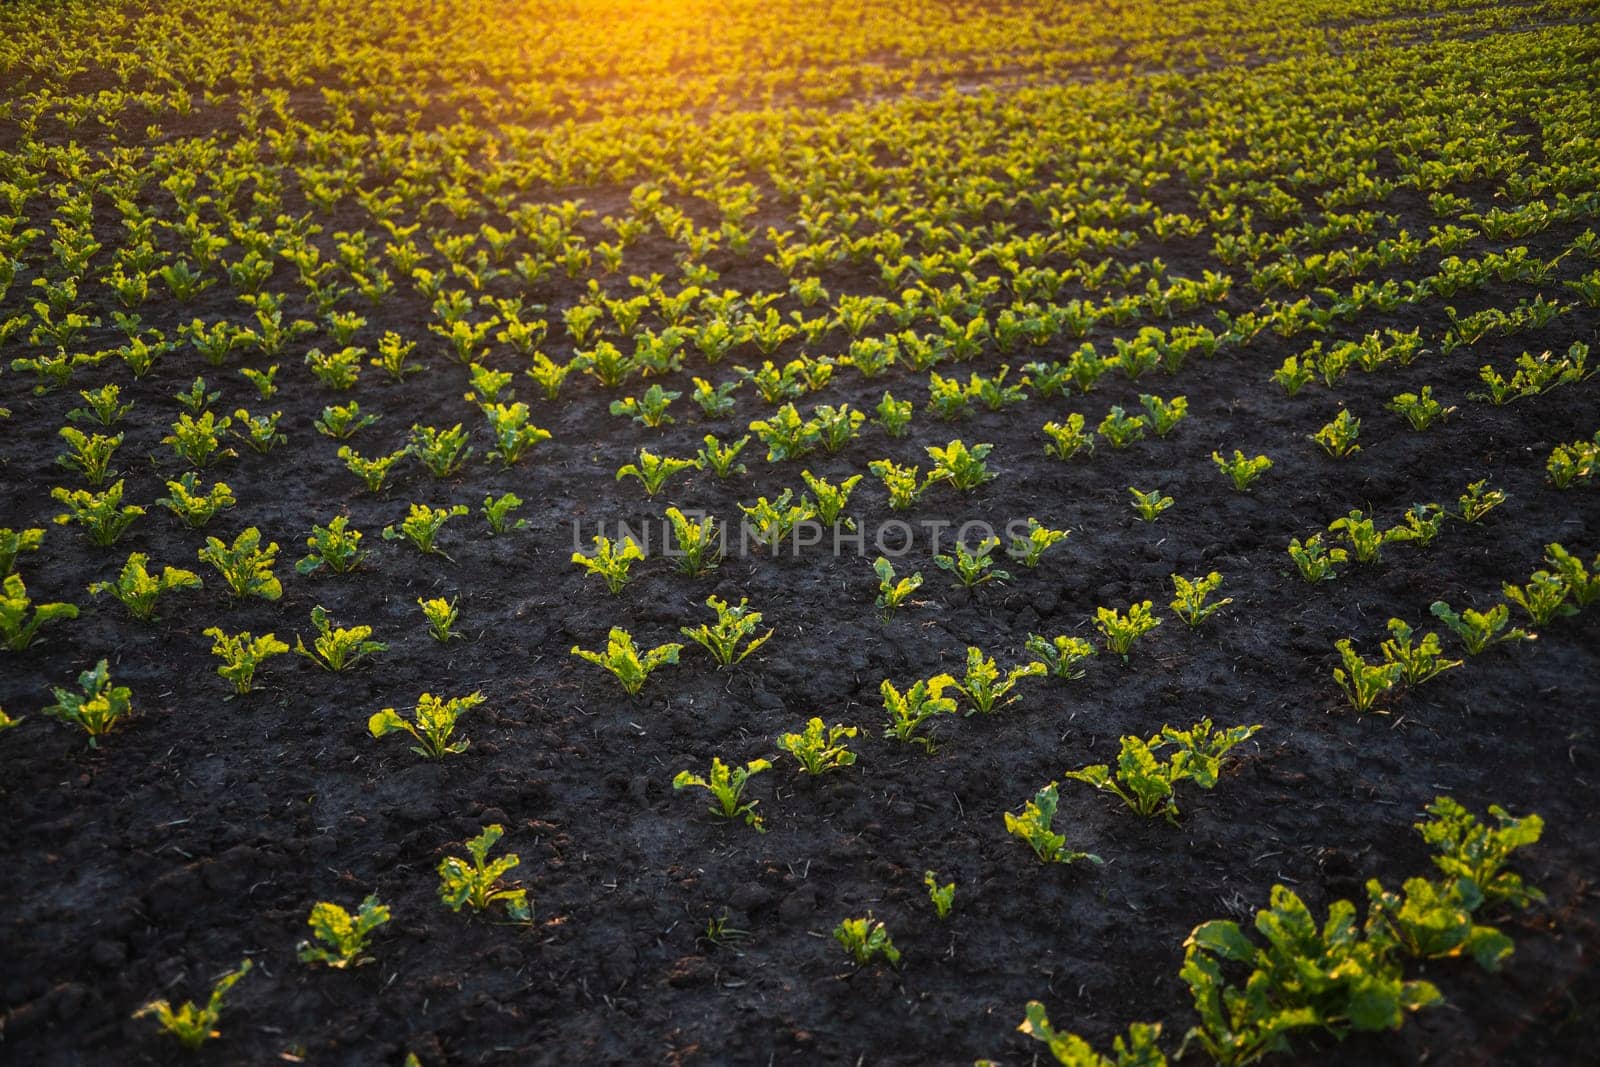 Rows of young sugar beetroot field. Leaves of young beet root plants in a sunset. Beetroots growing on agricultural field. The concept of agriculture, healthy eating, organic food